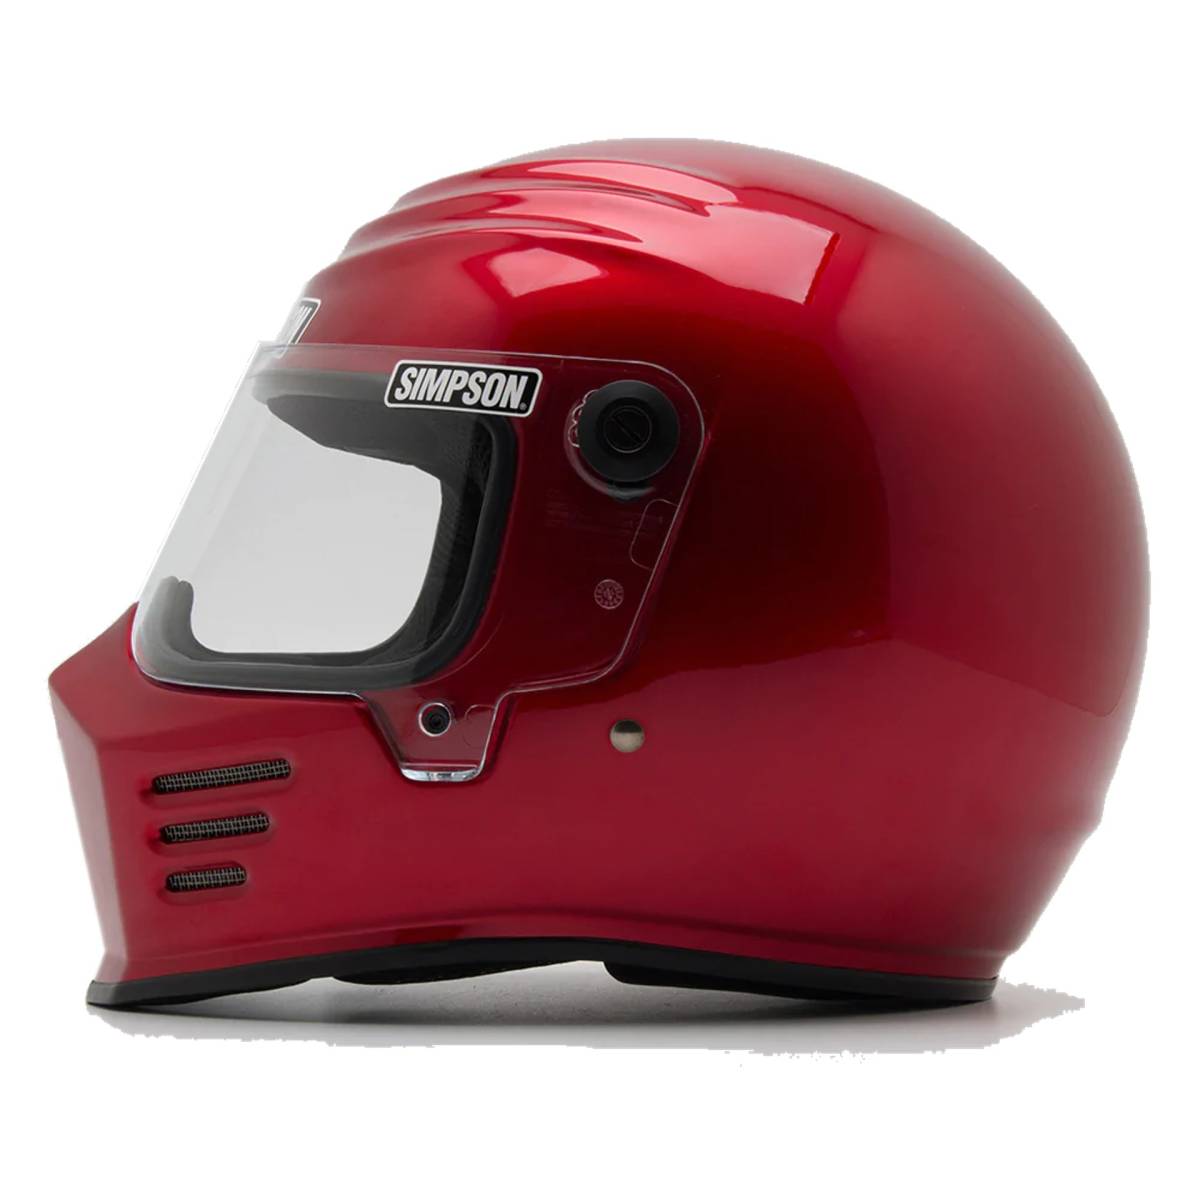 snorkel Urskive Syge person Simpson Racing Products Outlaw Bandit Motorcycle Helmet - Candee Red